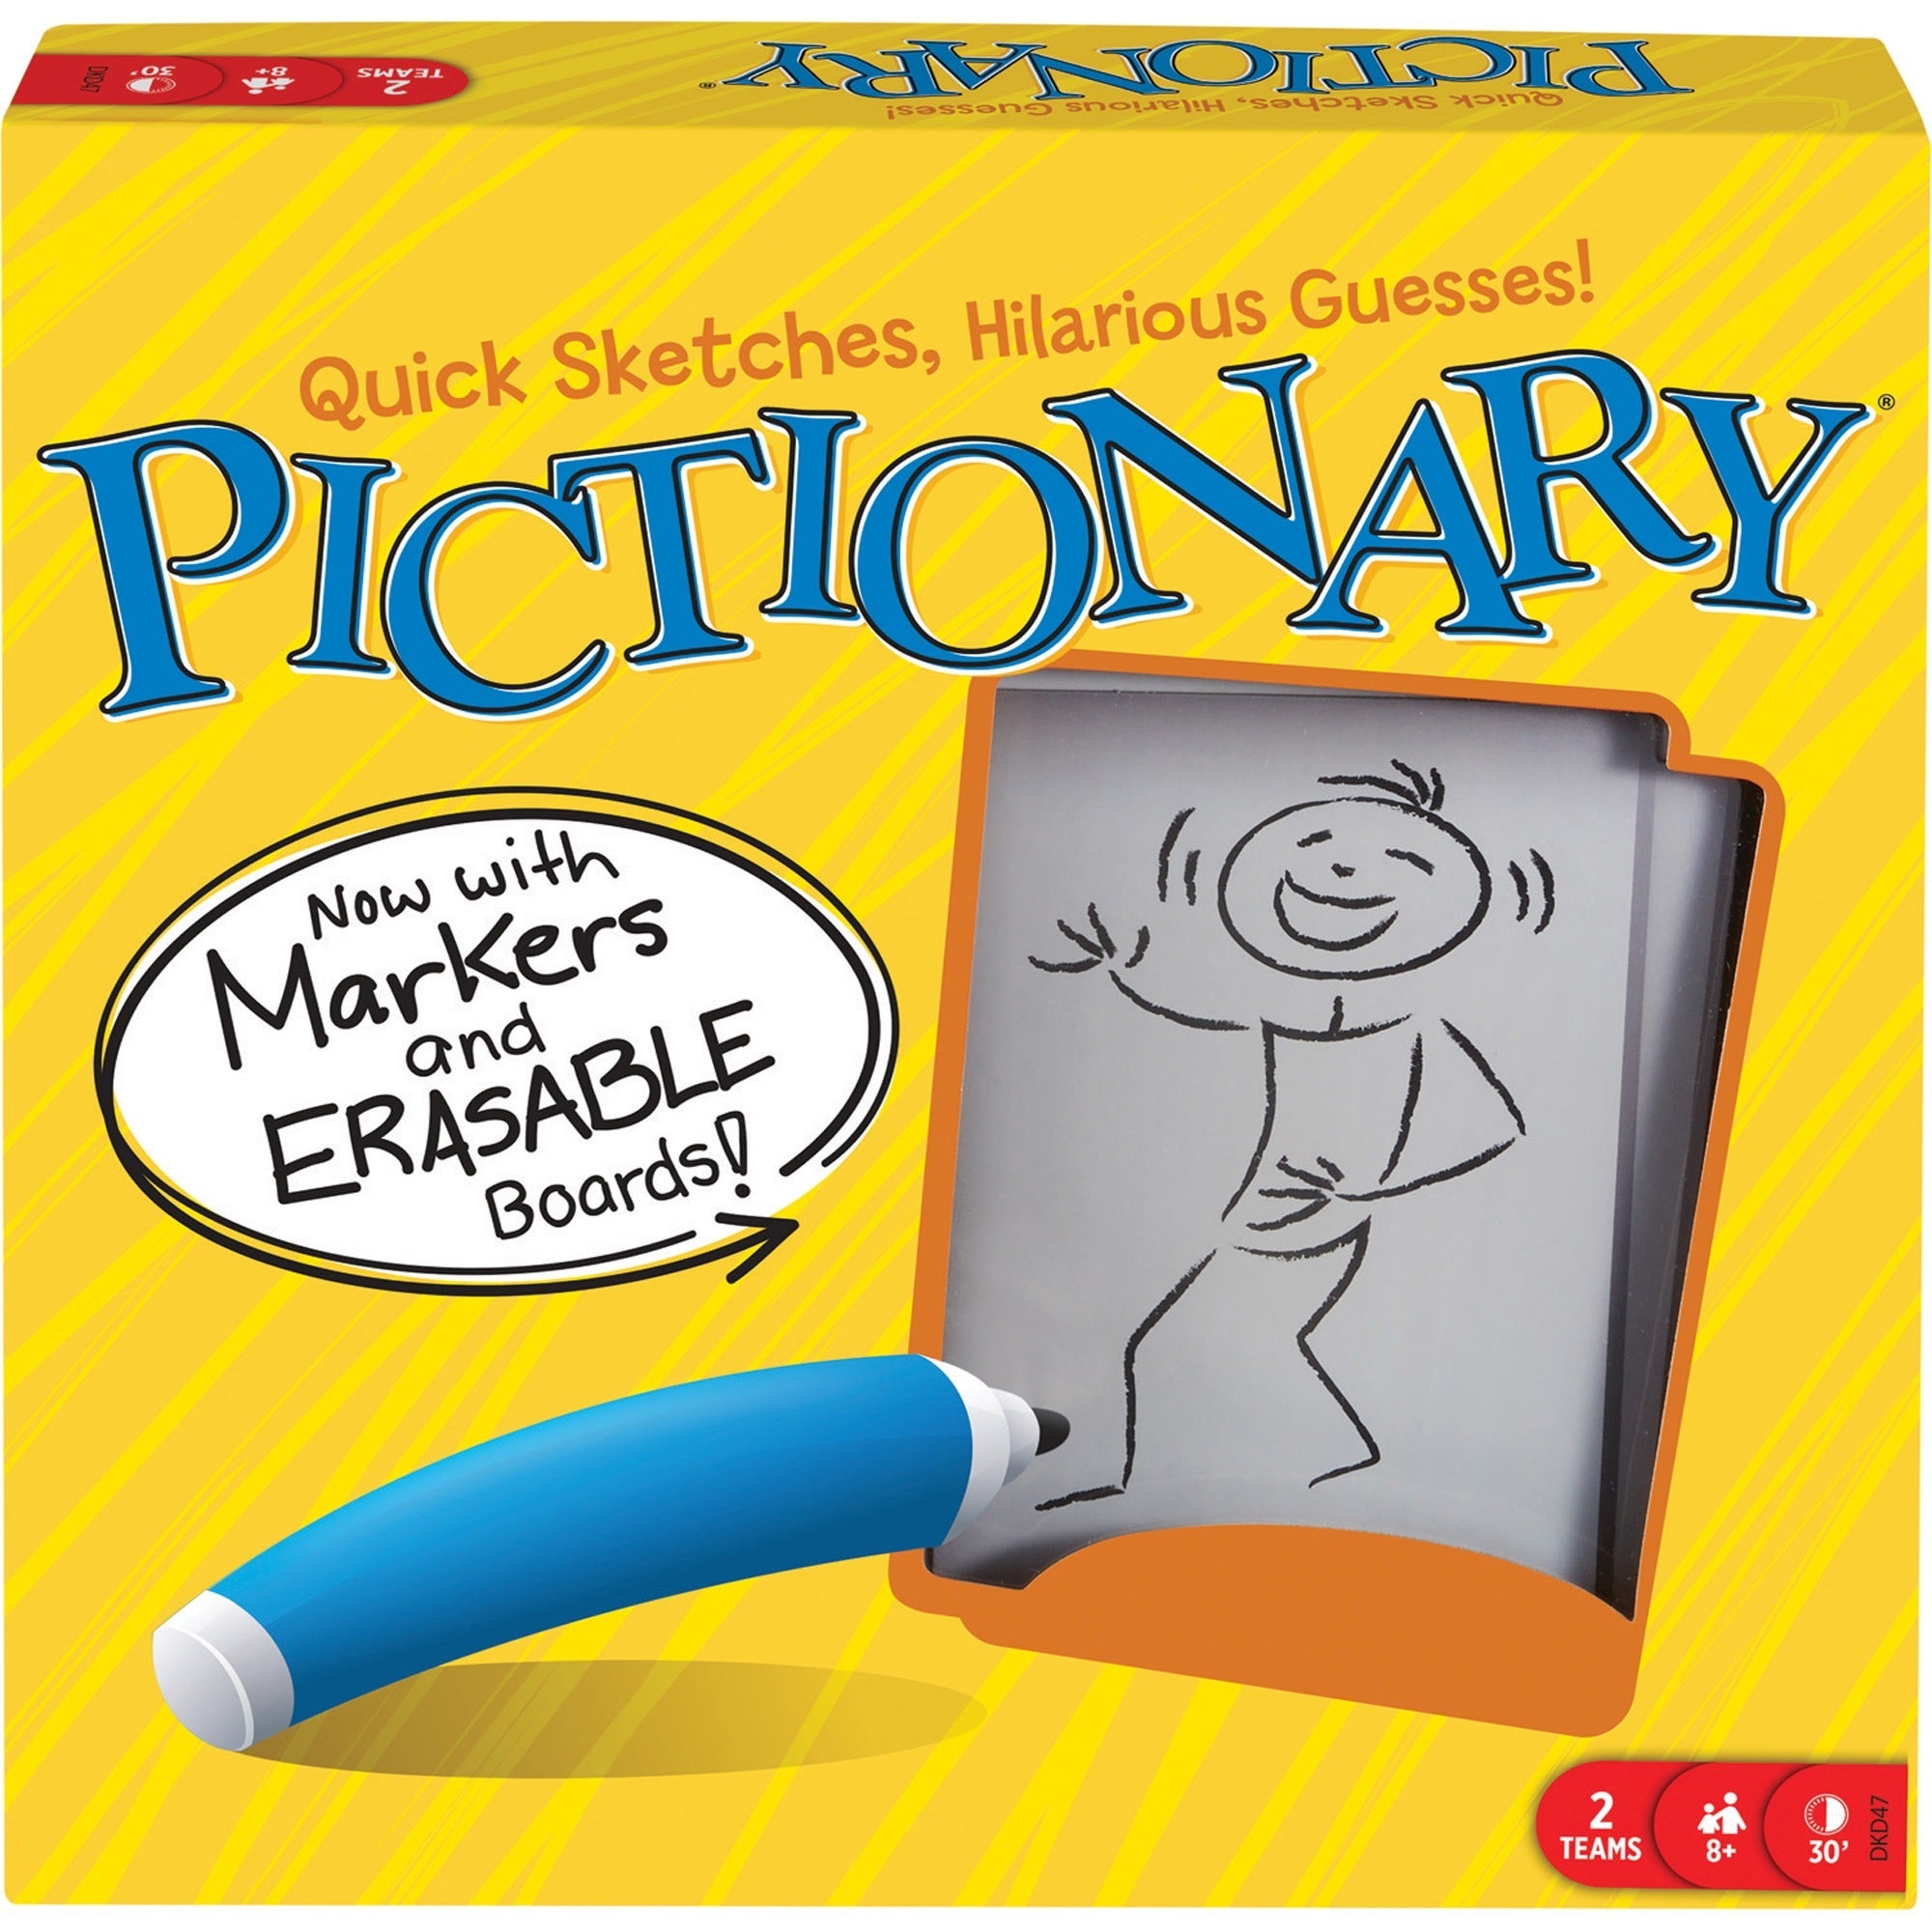 mattel-pictionary-the-classic-quick-draw-game-since-1985-guesses-can-be-just-as-hilarious-as-the-sketches_mttdkd47 - 1